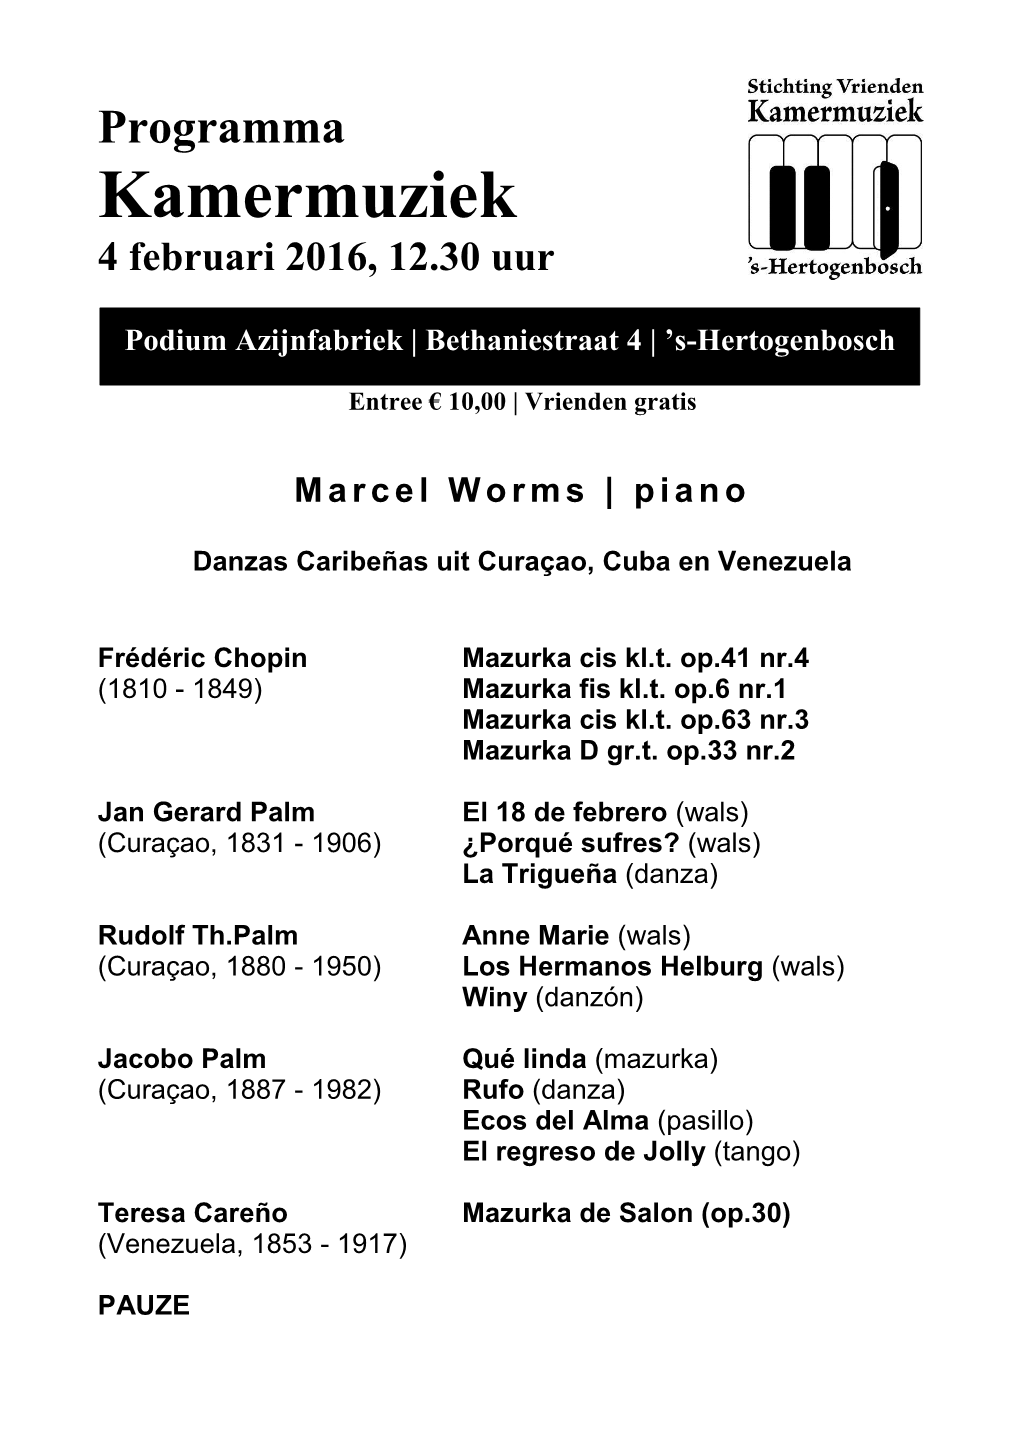 Marcel Worms | Piano